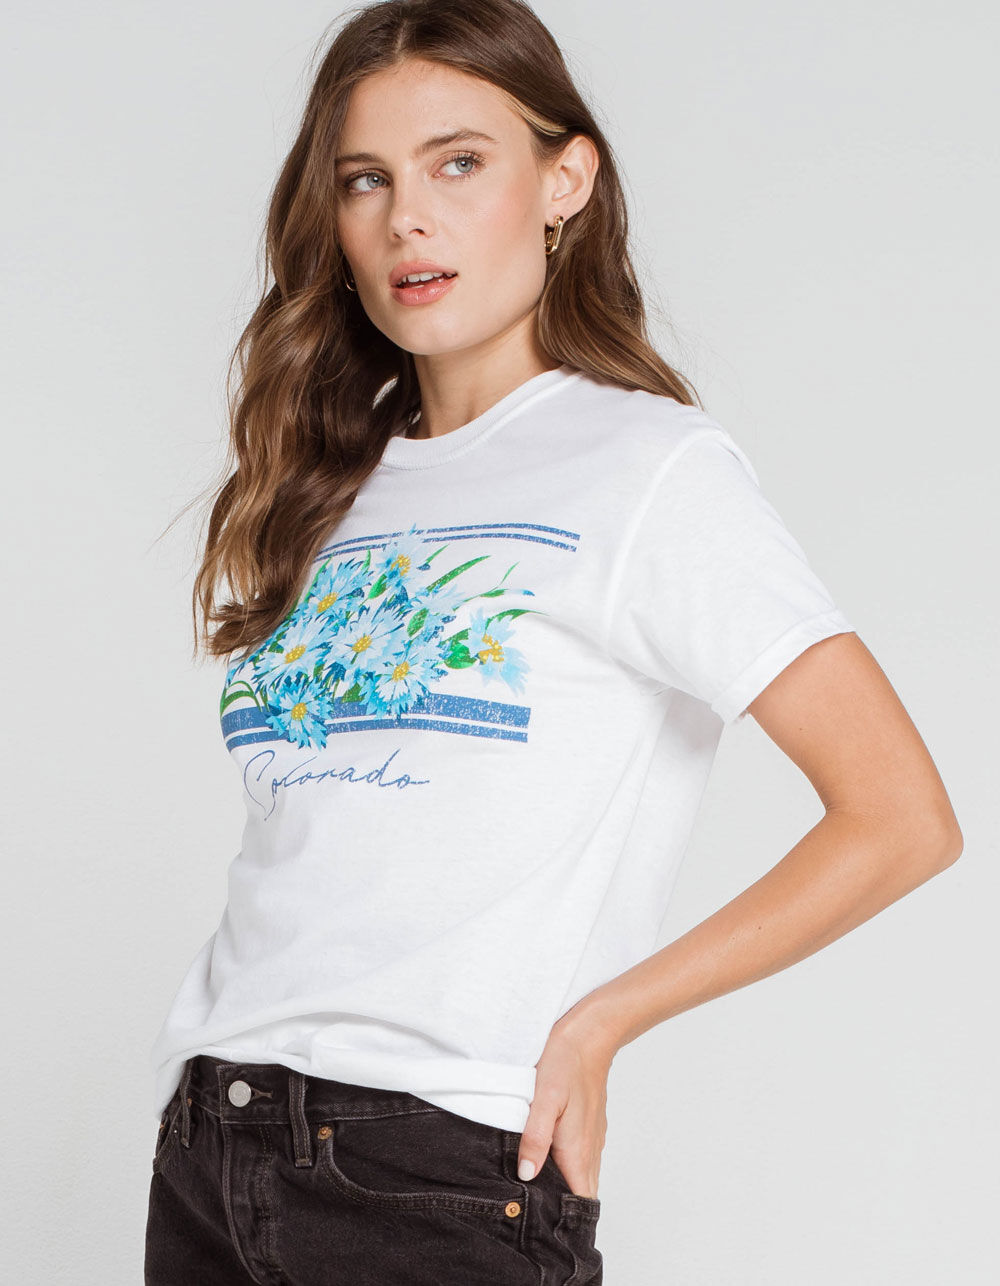 WEST OF MELROSE Colorado Blue Flowers Womens Tee - WHITE | Tillys